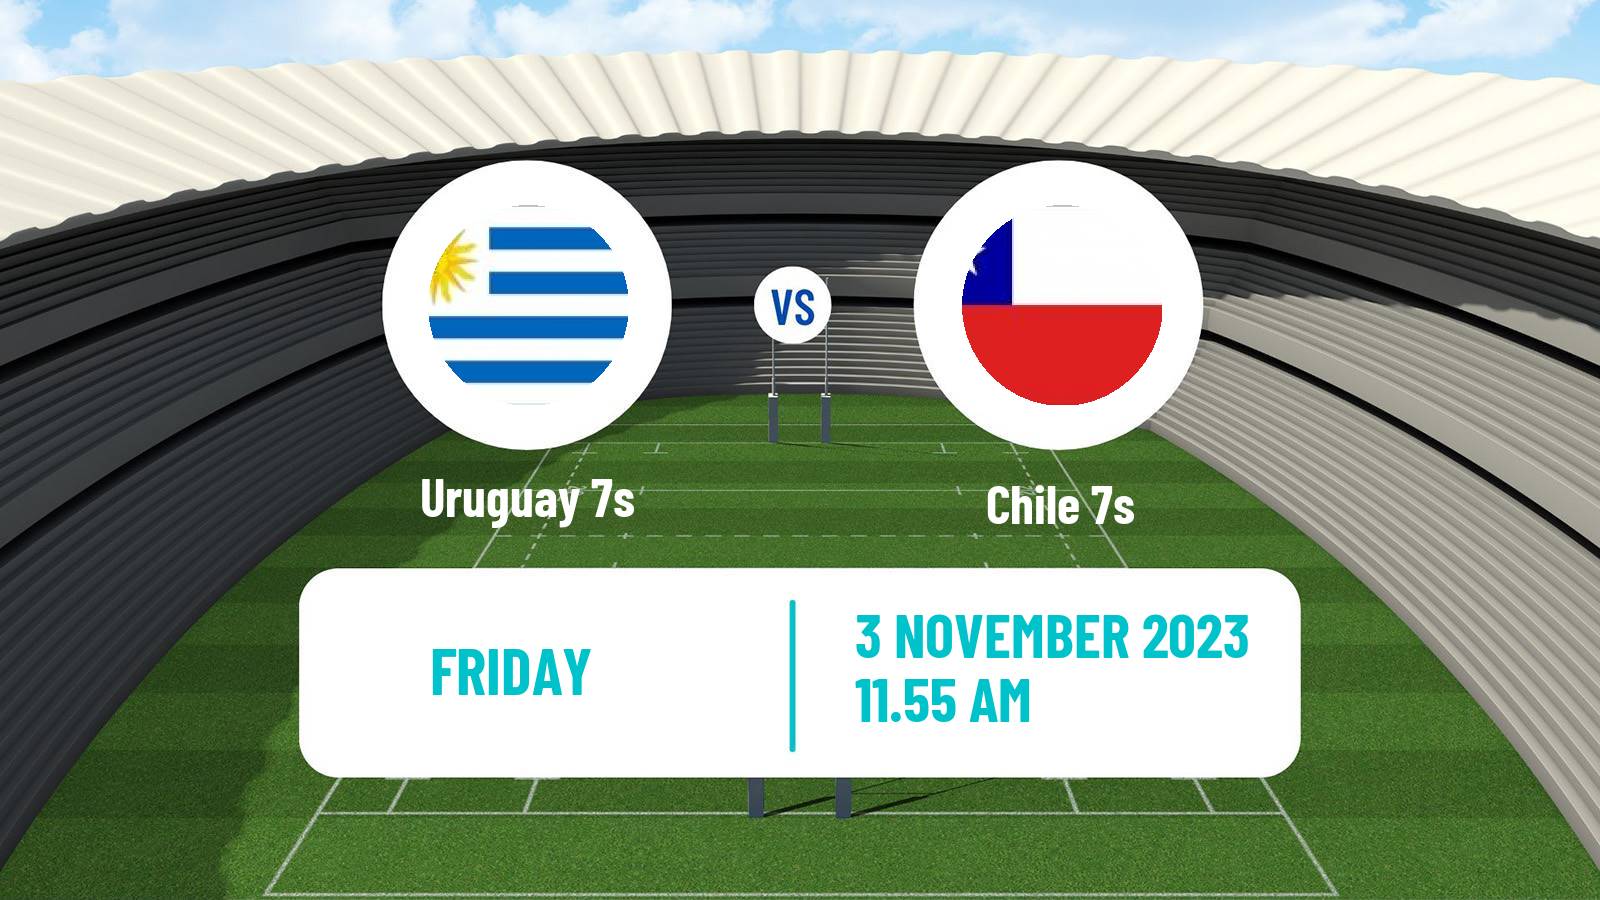 Rugby union Pan American 7s Rugby Uruguay 7s - Chile 7s